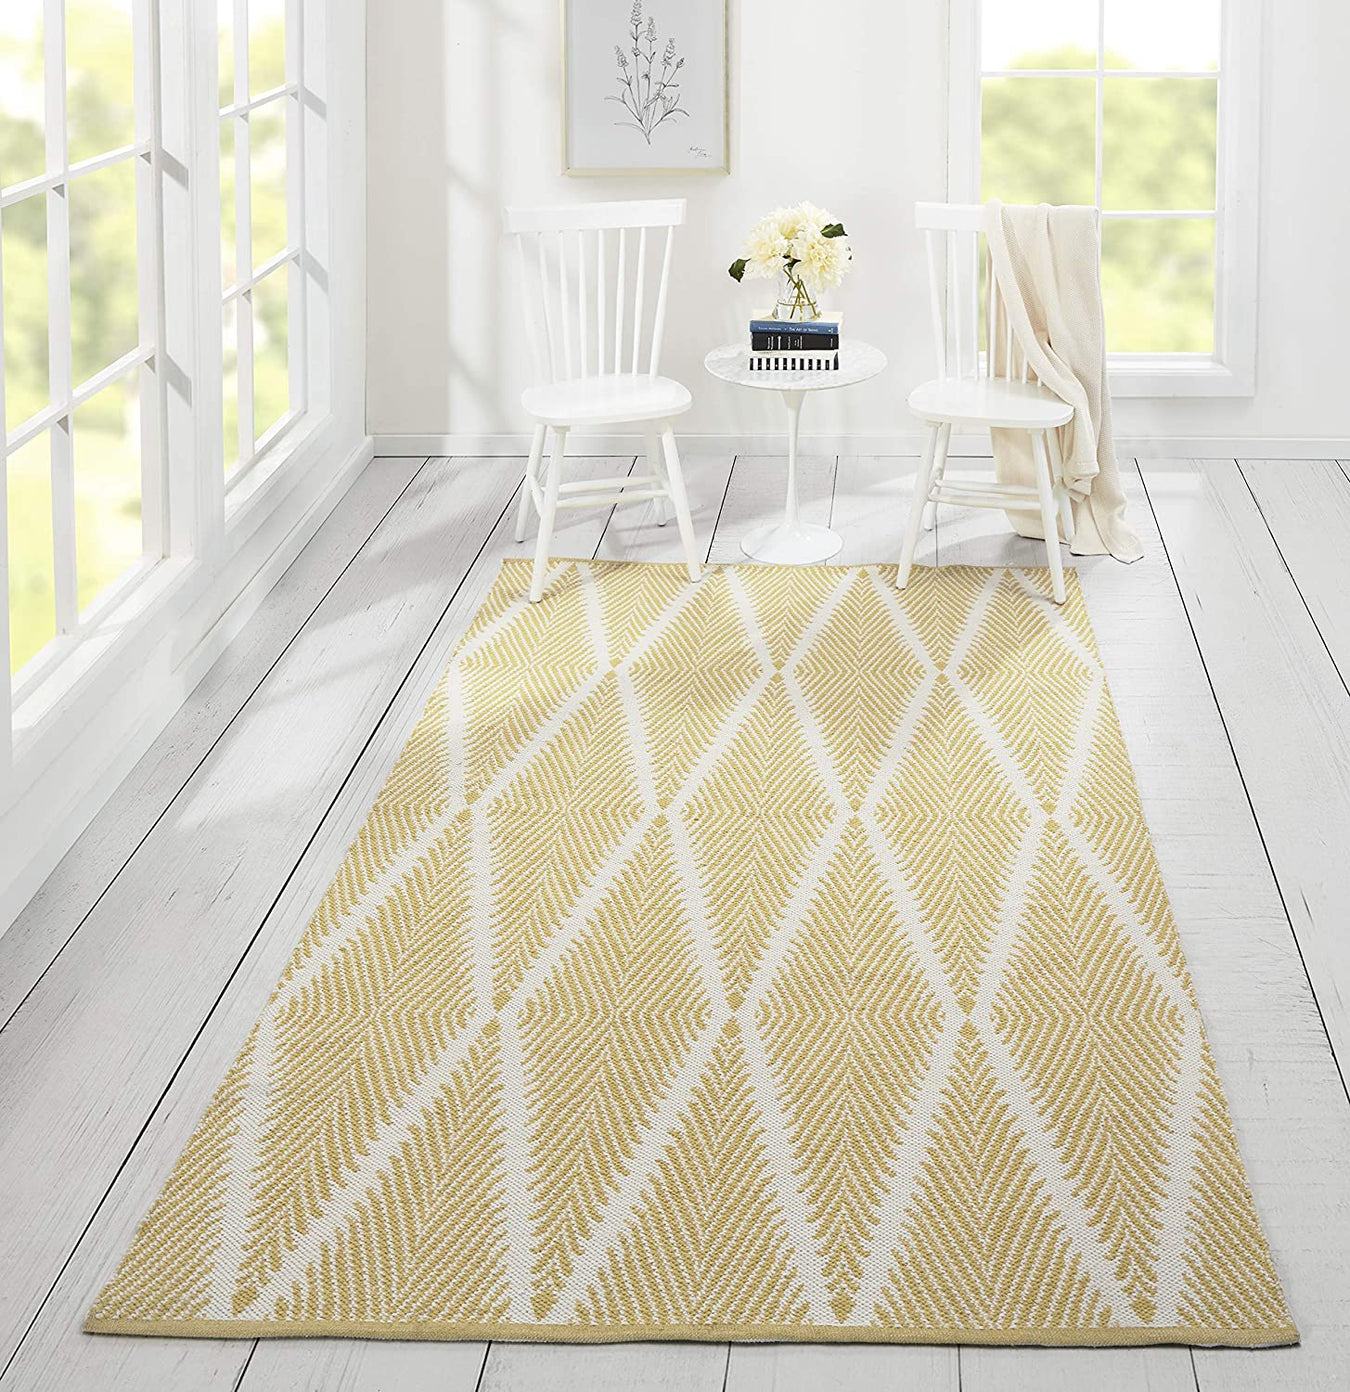 FLASH SALE! UP TO 50% OFF! ON MOMENI AREA RUGS!